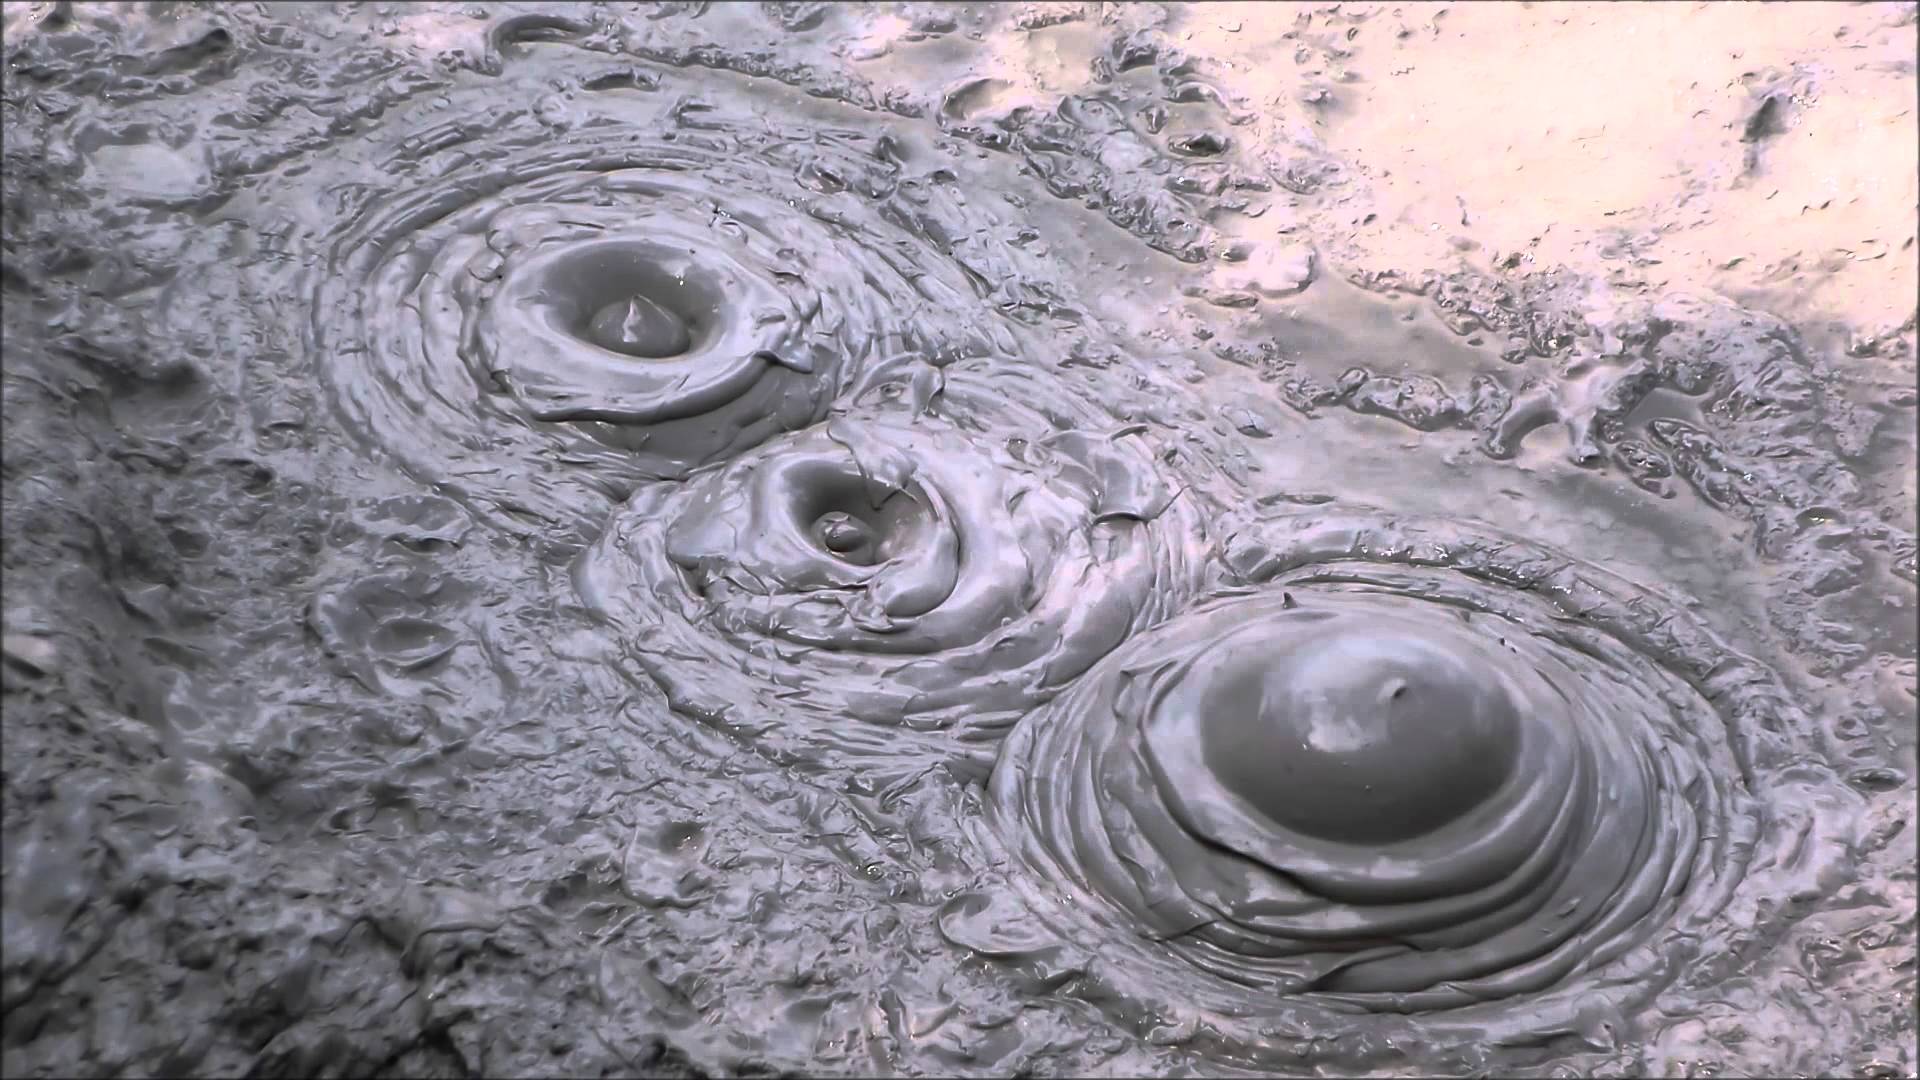 Free place to see hot bubbling mud - YouTube